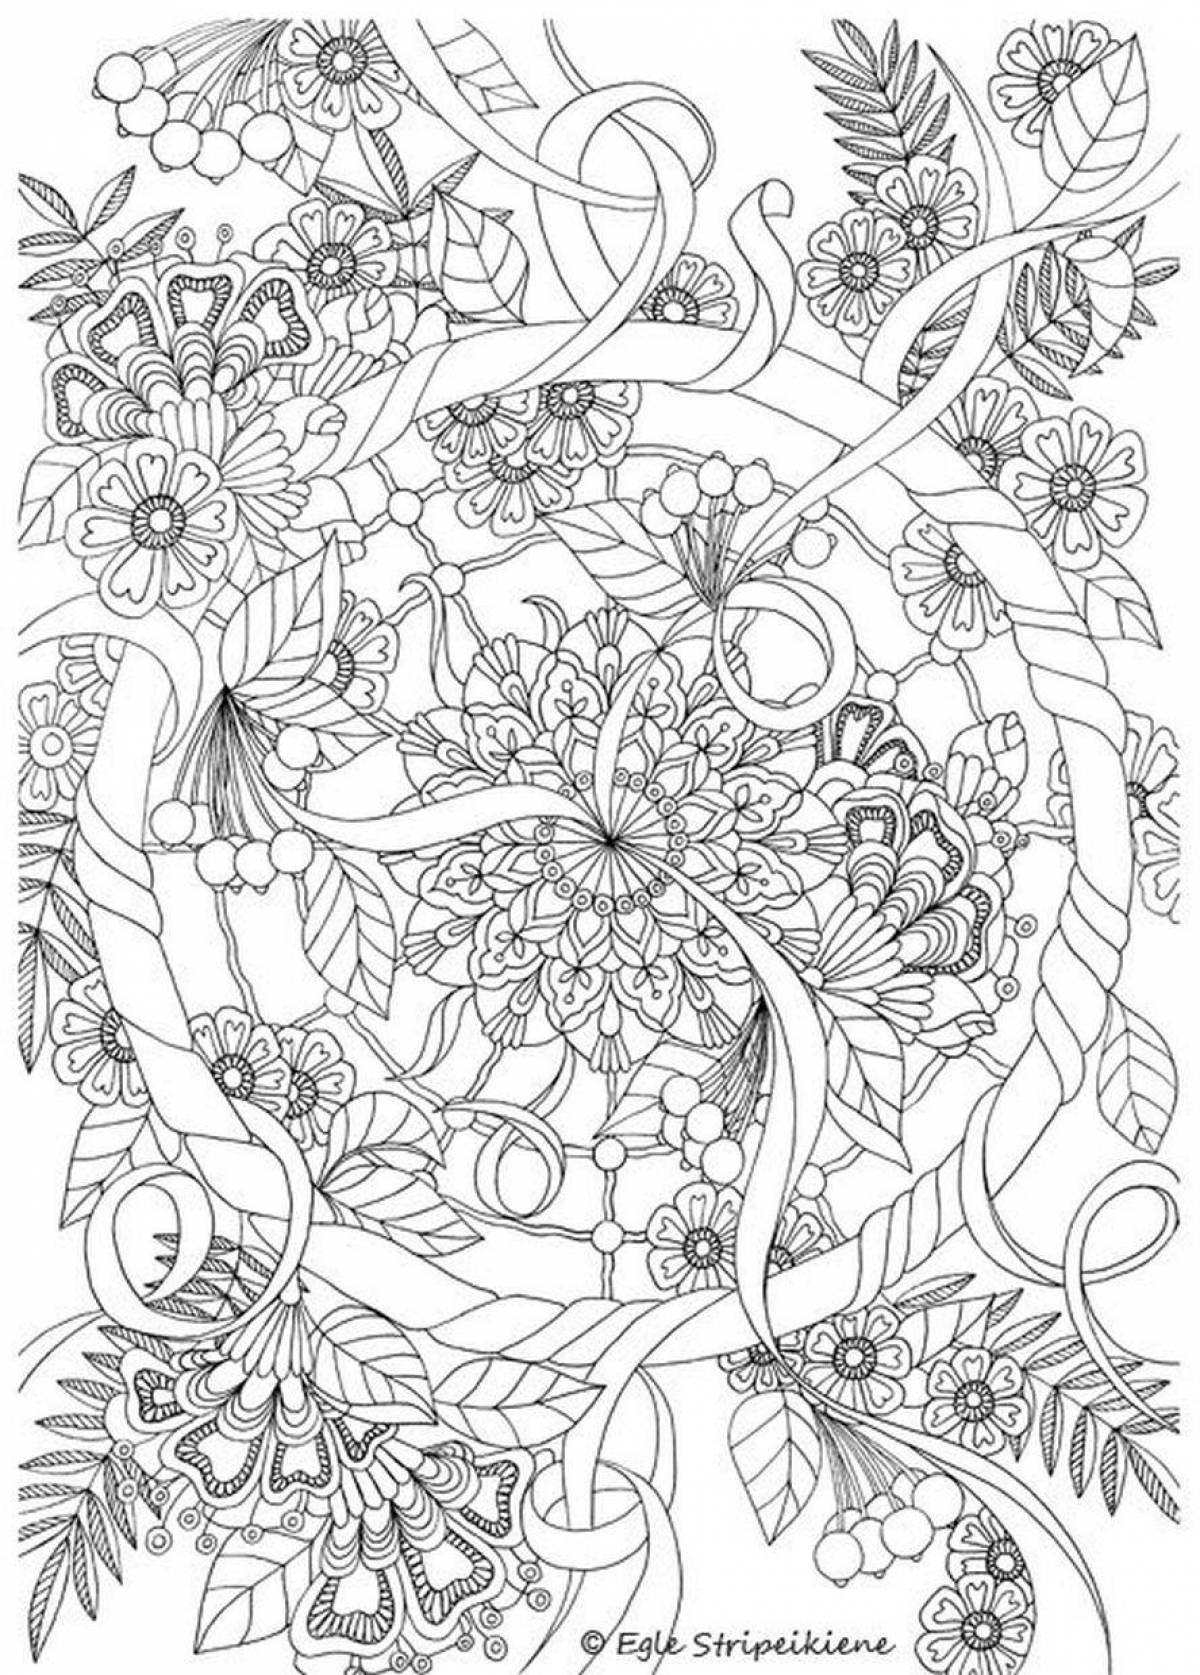 Peaceful anti-stress coloring book for adults